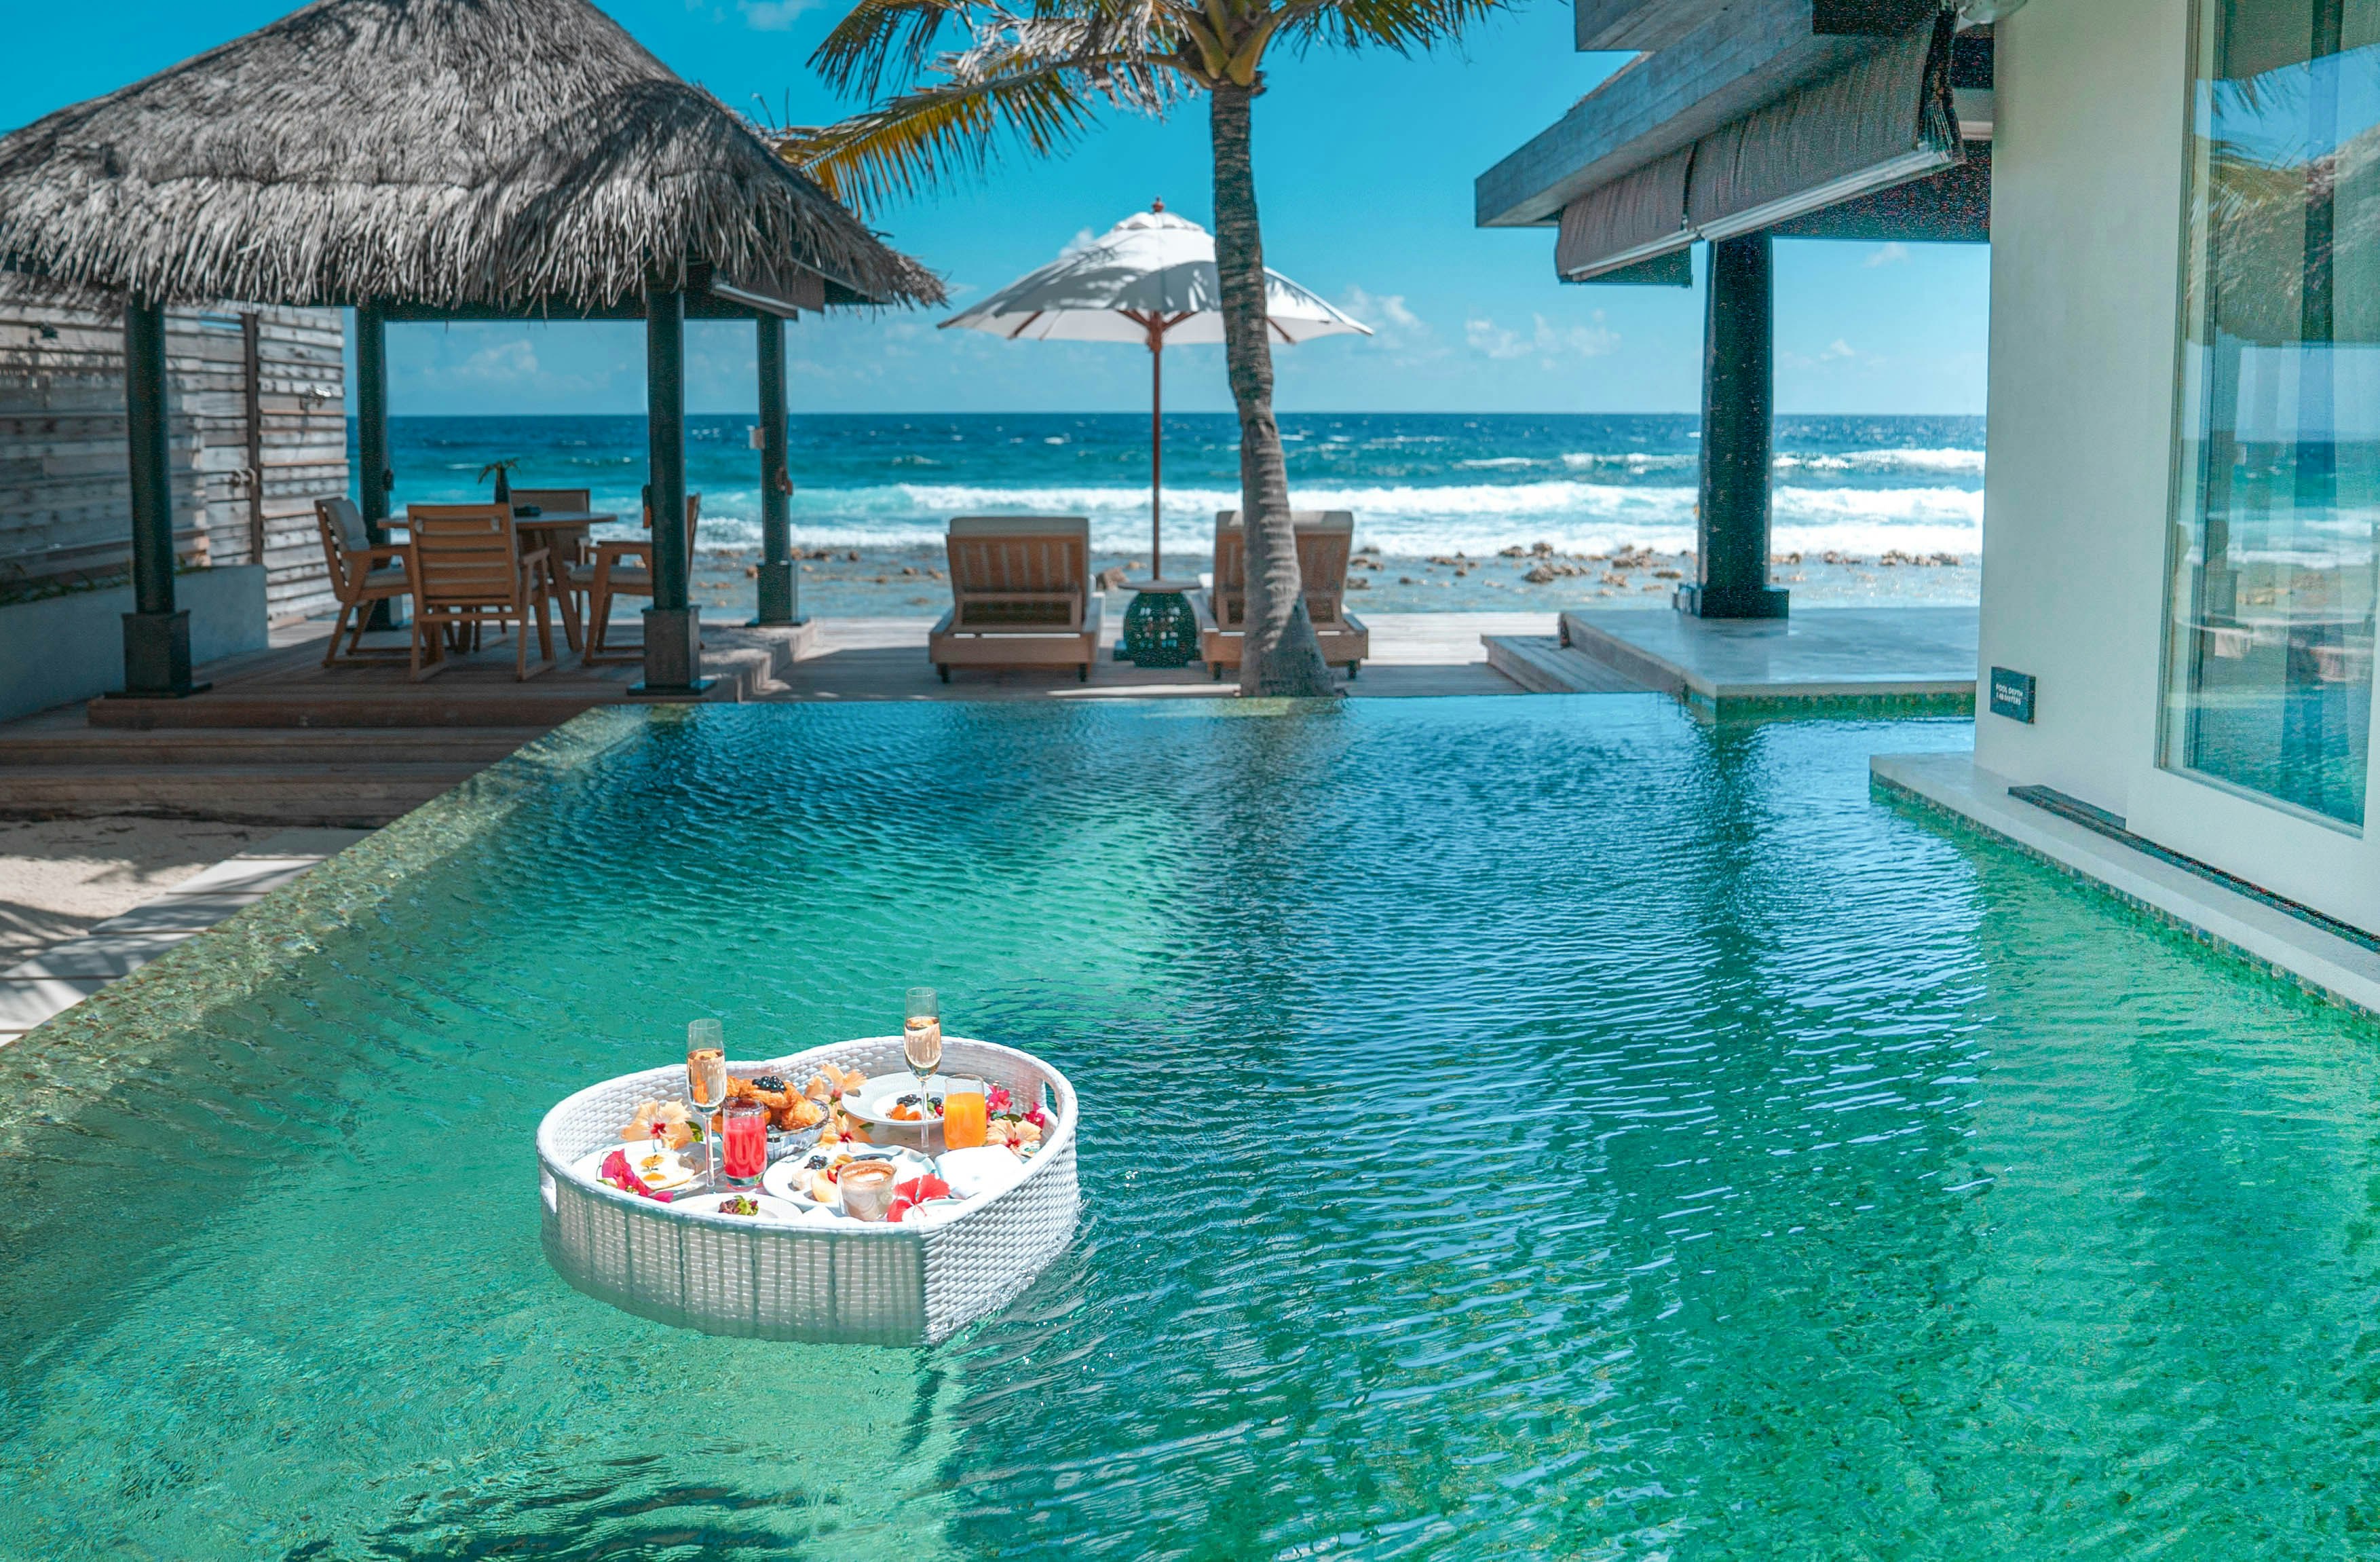 A floating Champagne breakfast in a private pool at the Naladhu Private Island resort, Maldives